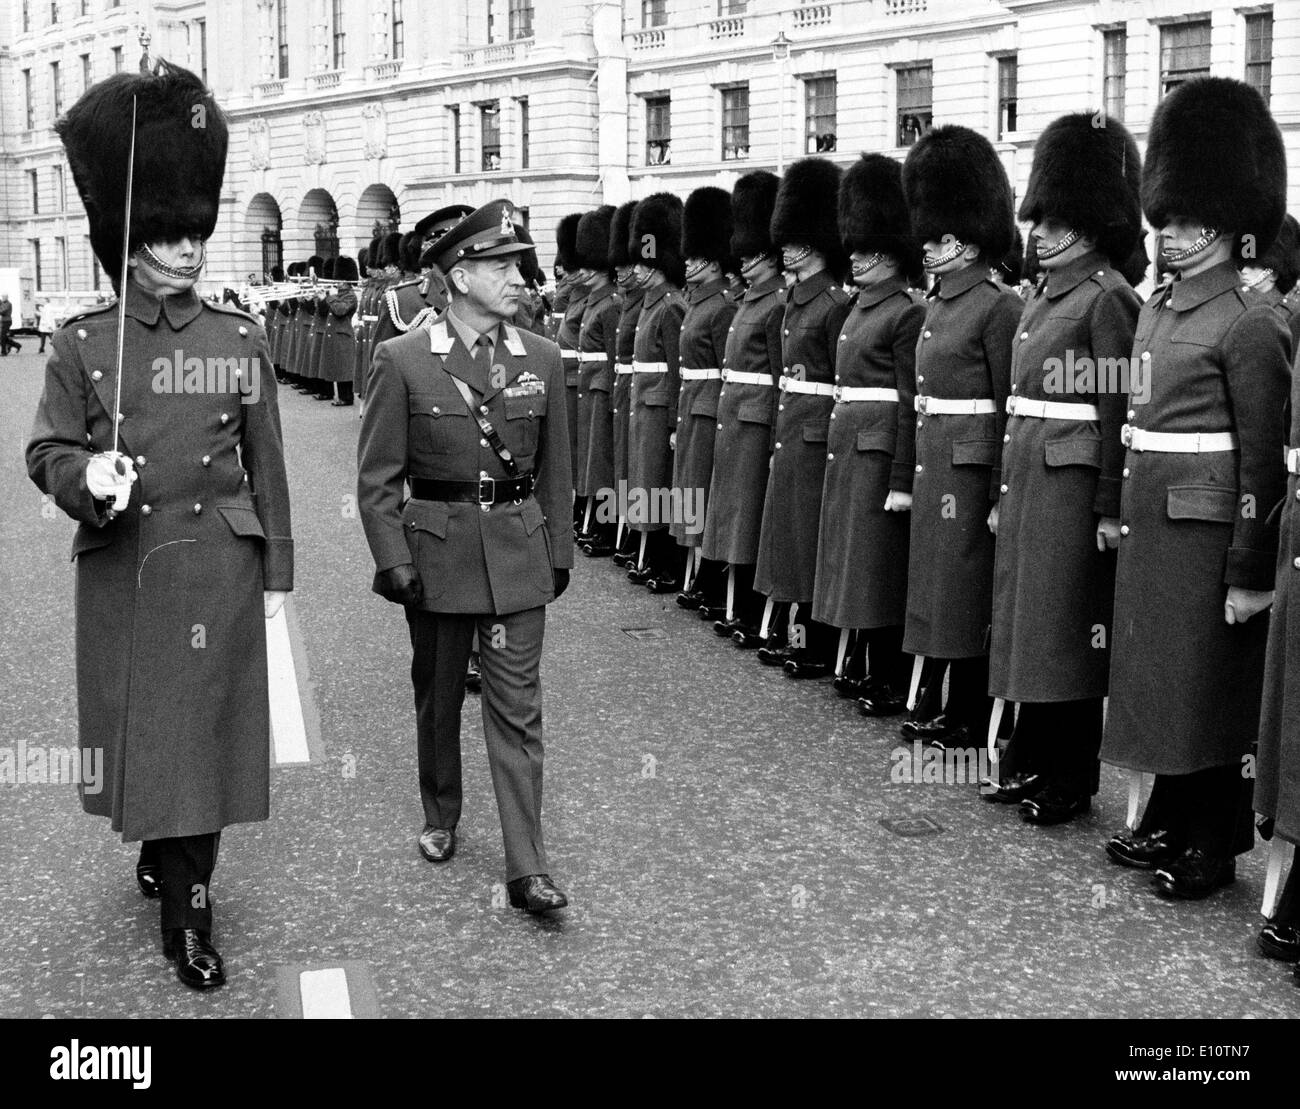 Major General O.J. BANGSTAD, Inspector General of the Norwegian Army, inspecting 2nd Battalion Coldstream Guards in UK Stock Photo